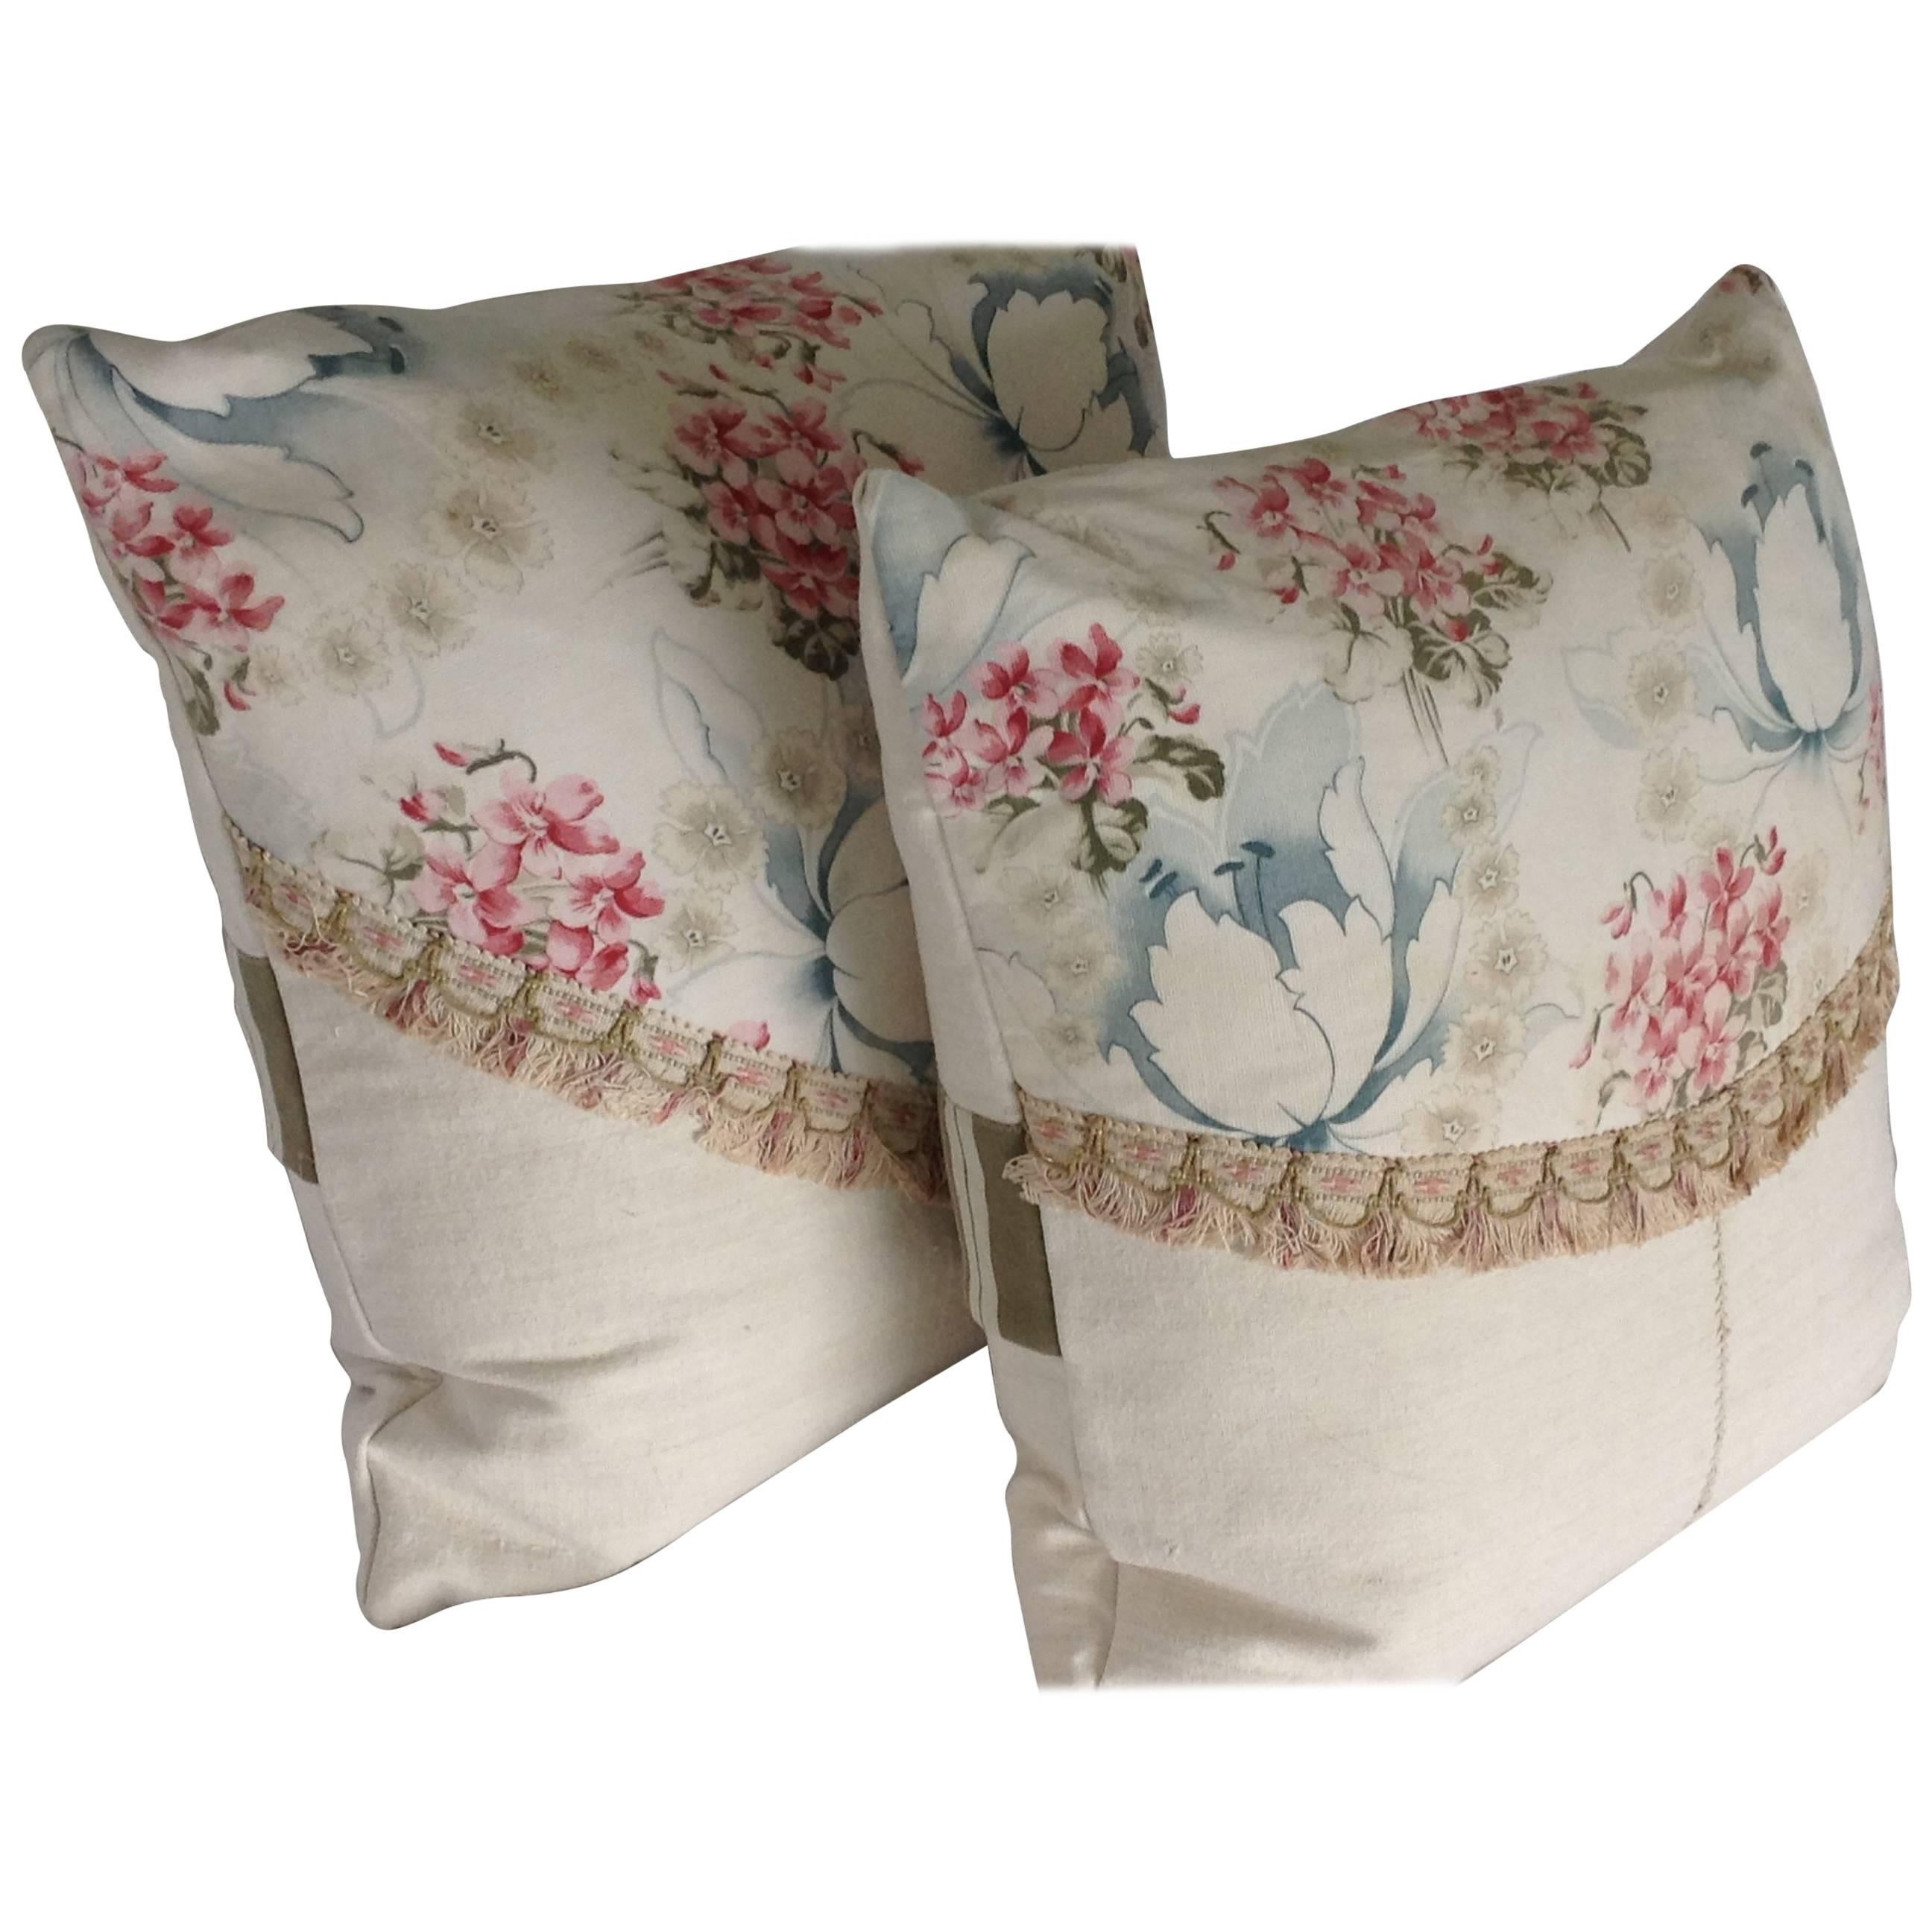 Pair of French Printed Cotton and Homespun Linen Pillows